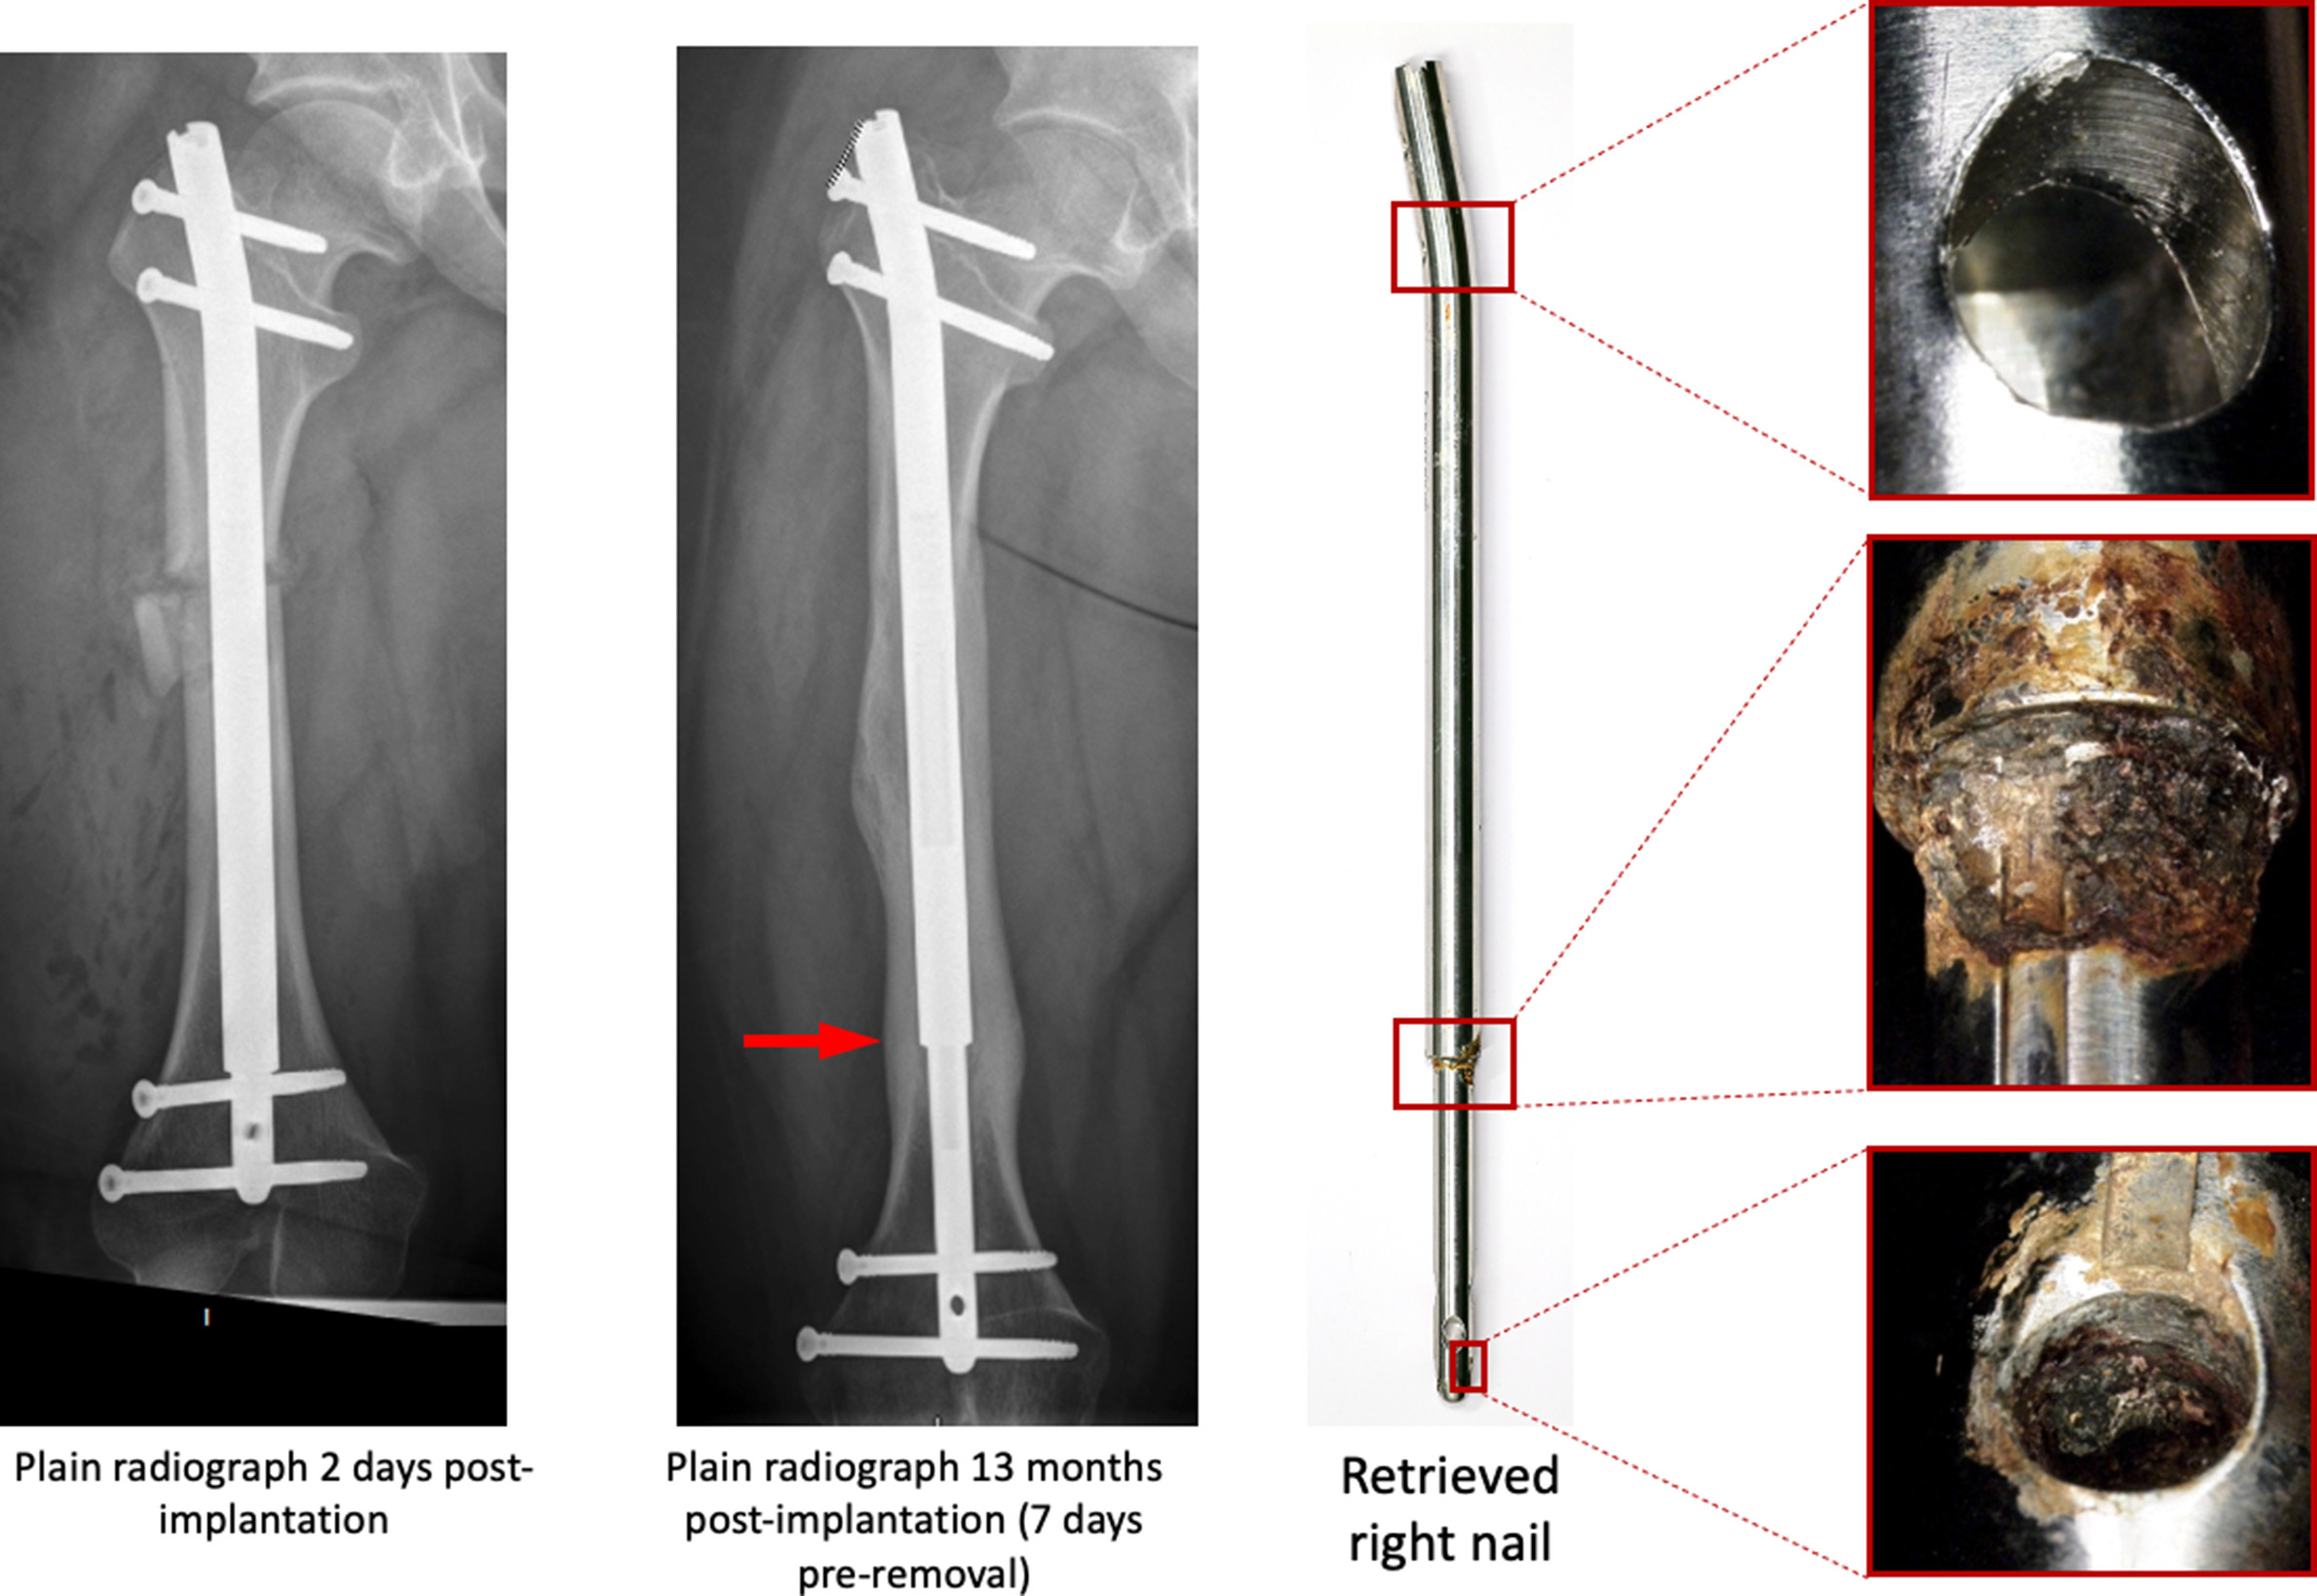 Fig. 10 
            Images showing immediate postimplantation and preremoval plain radiographs of Patient 2 implanted with a right femoral nail, removed after 13 months. There is evidence of clear cortical thickening around the extendable junction on the pre-removal radiograph (right arrow). This corresponds with retrieval evidence of severe corrosion at this junction, as well as at the most distal nail-screw junction.
          